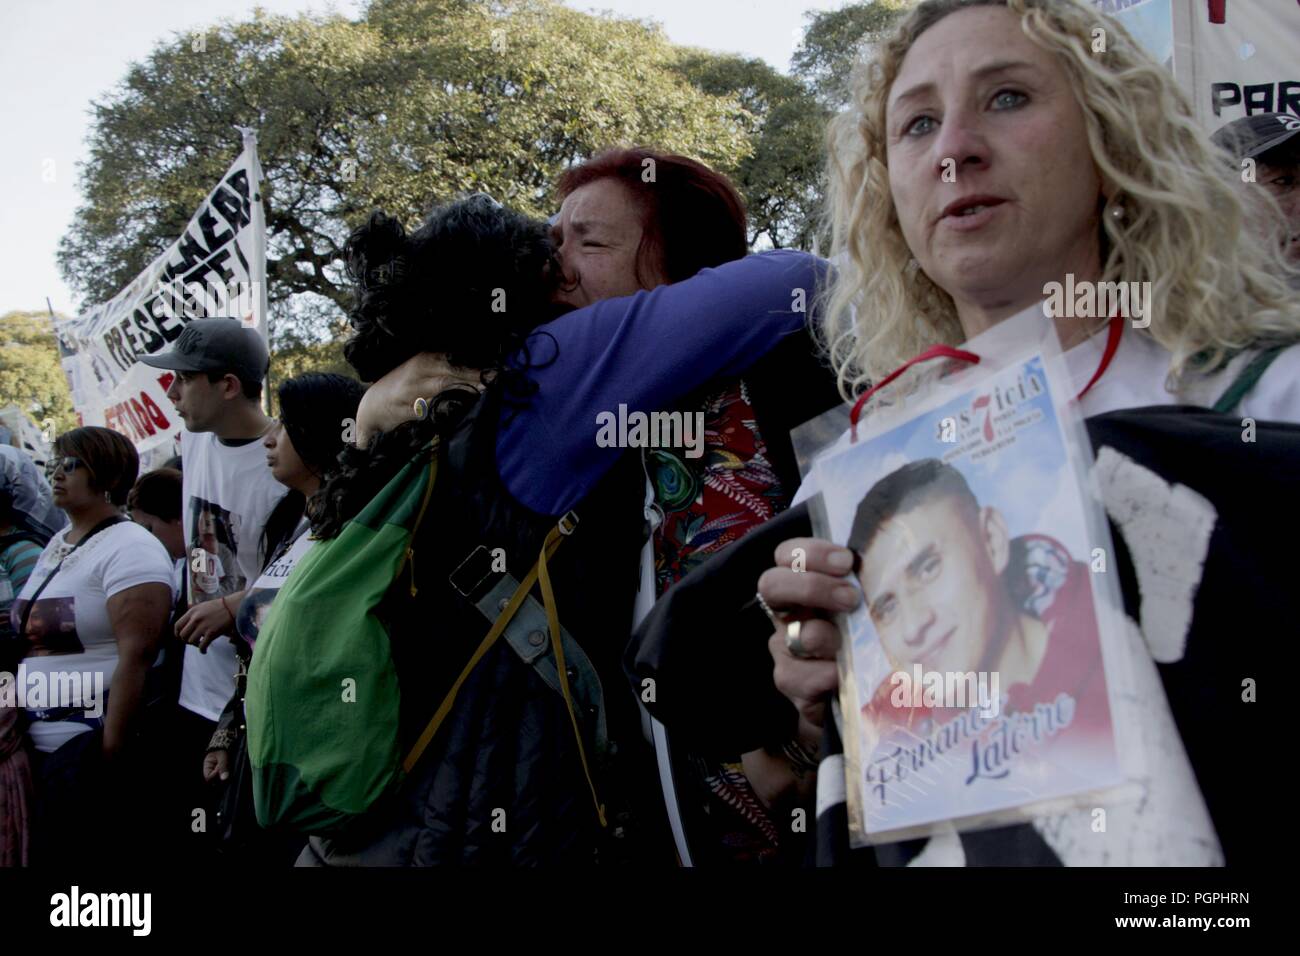 Buenos Aires, Federal Capital, Argentina. 27th Aug, 2018. The relatives of the victims of the ''Easy Trigger'' March in Buenos Aires from the Congress of the Argentine Notion to Plaza de Mayo in the 4th National March Against the Easy Trigger denouncing the shooting of young people by the Argentine security agencies. The march is carried out simultaneously in several cities of the country Credit: Roberto Almeida Aveledo/ZUMA Wire/Alamy Live News Stock Photo